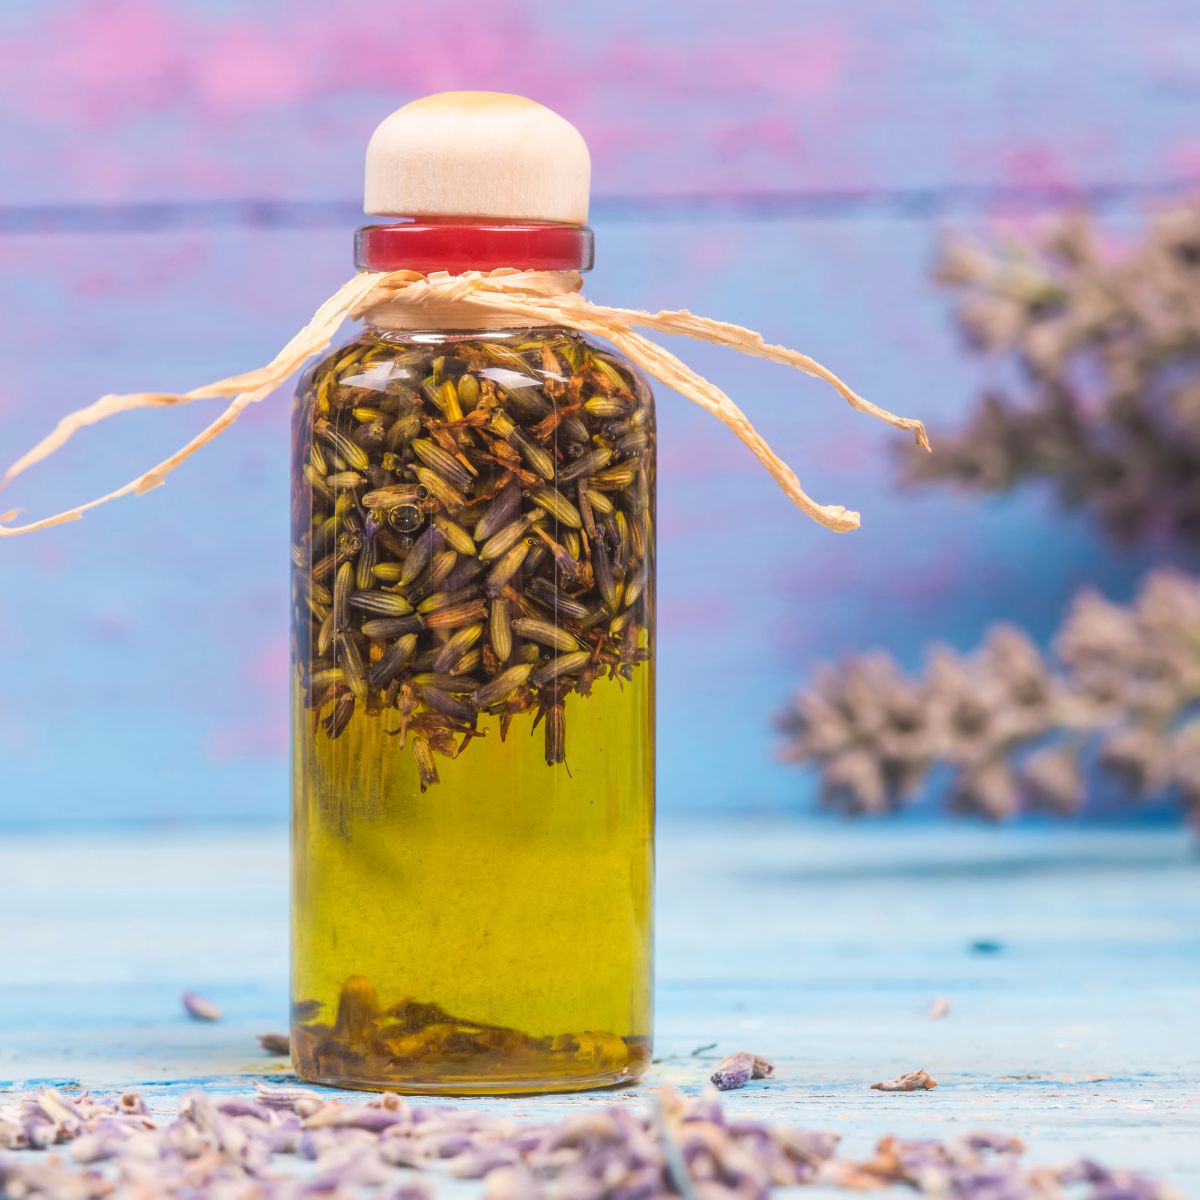 Lavender buds being infused in a glass bottle with olive oil.